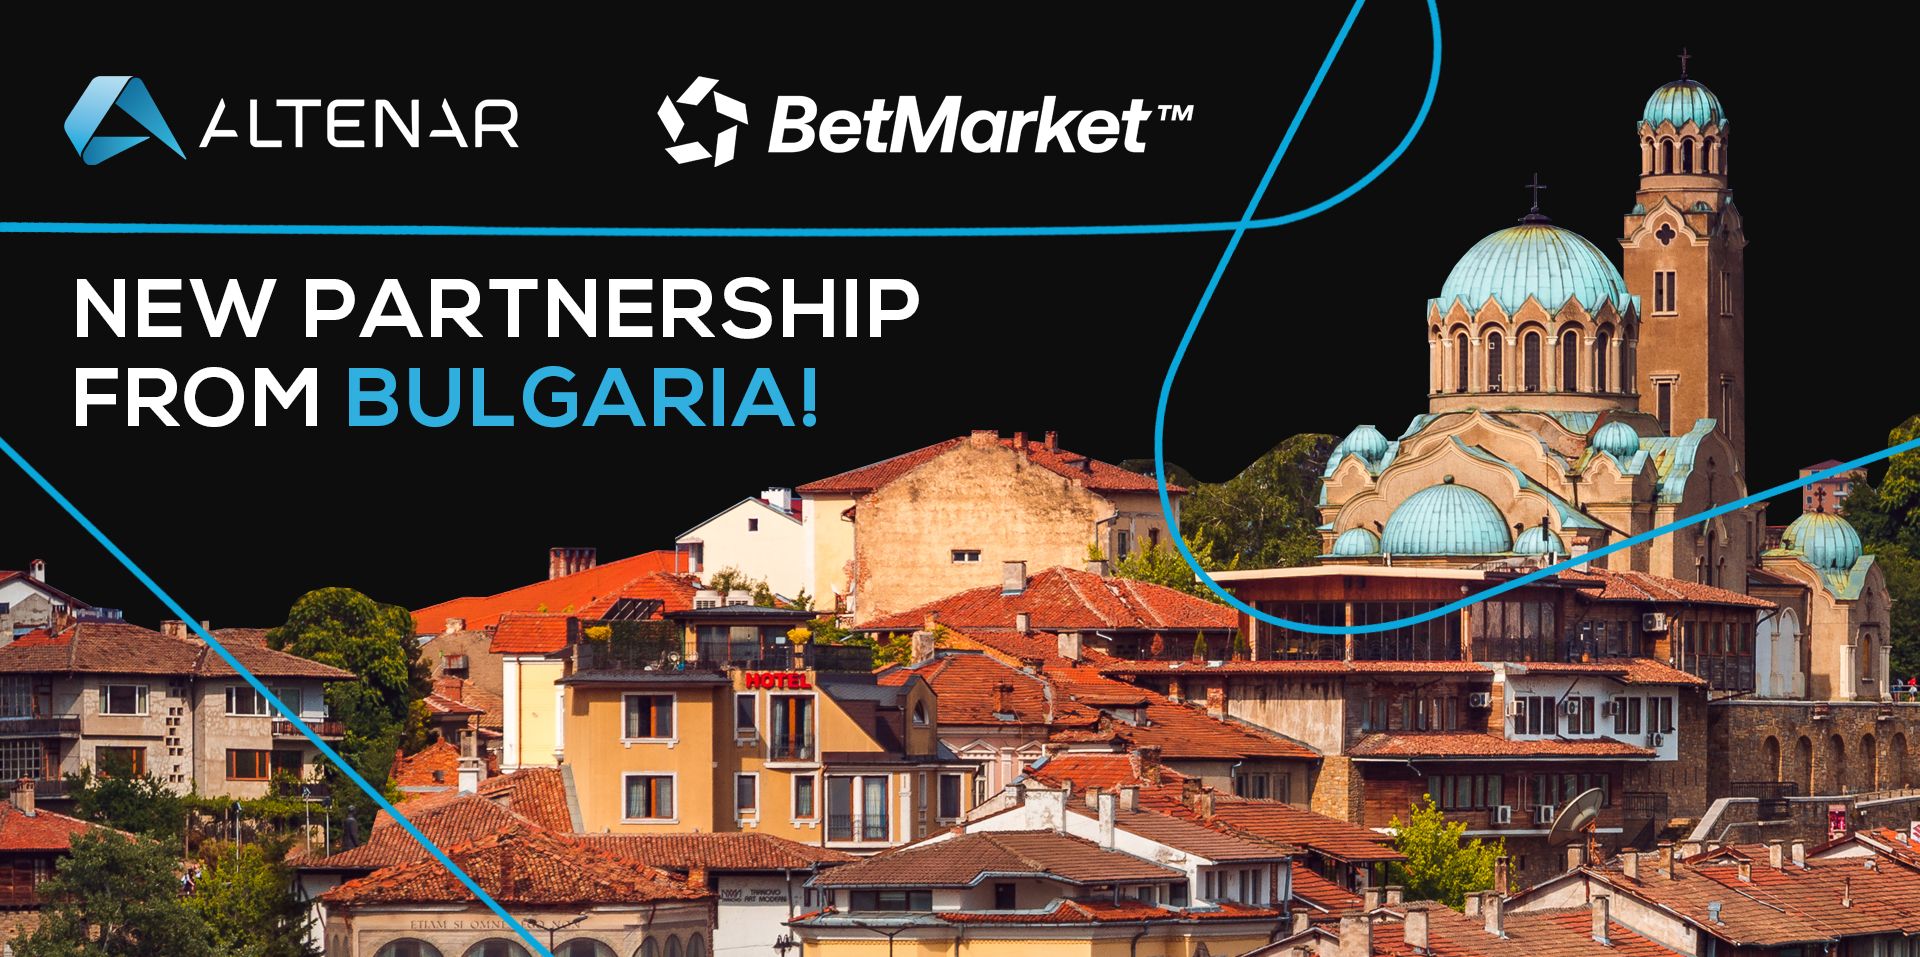 altenar-goes-live-in-bulgaria-with-betmarket-partnership